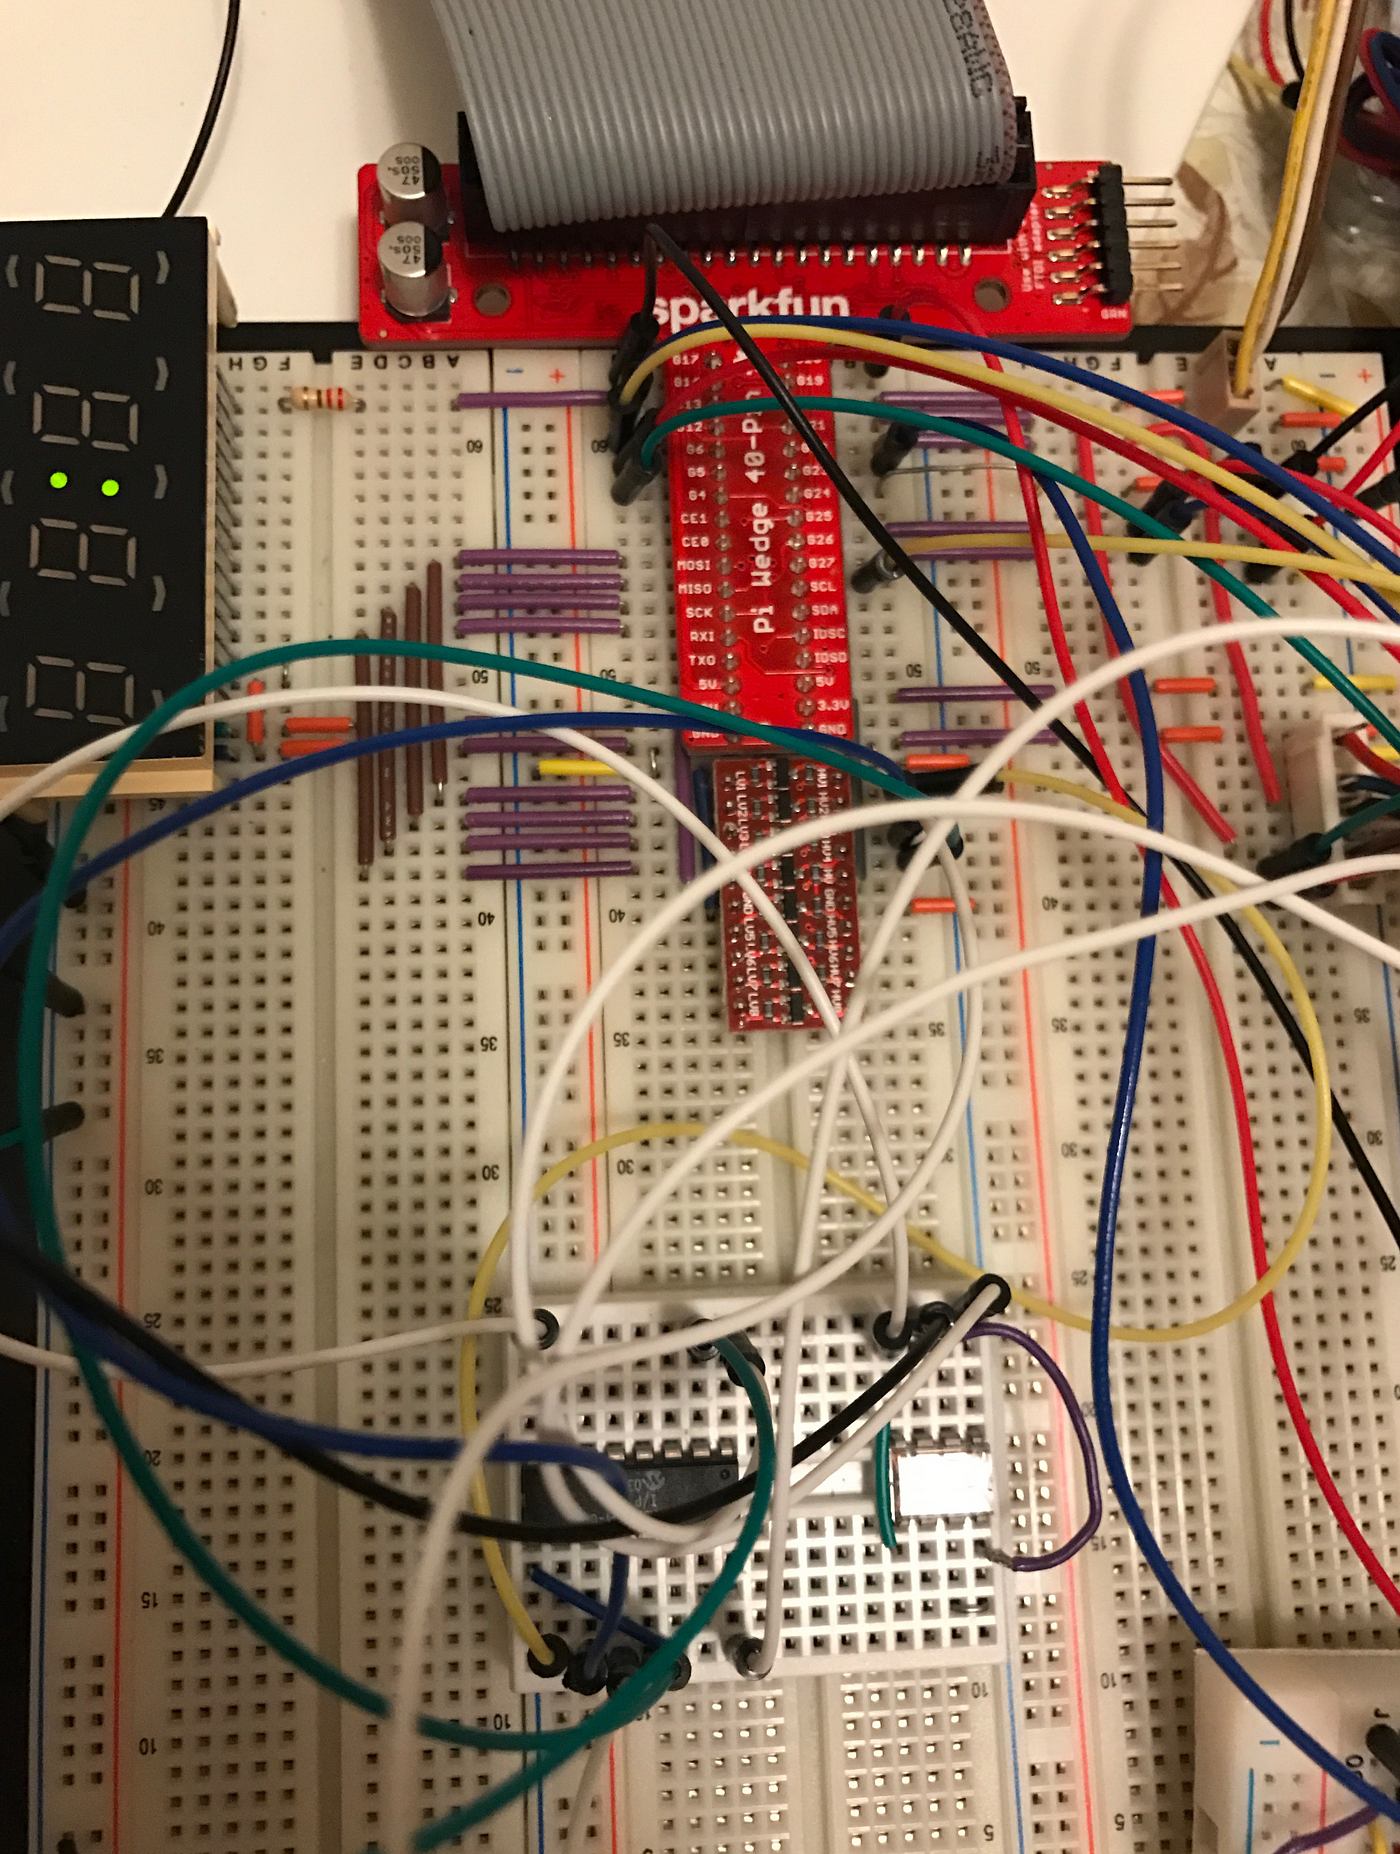 Upgrading to a giant breadboard for Raspberry Pi GPIO peripherals, by R.  X. Seger